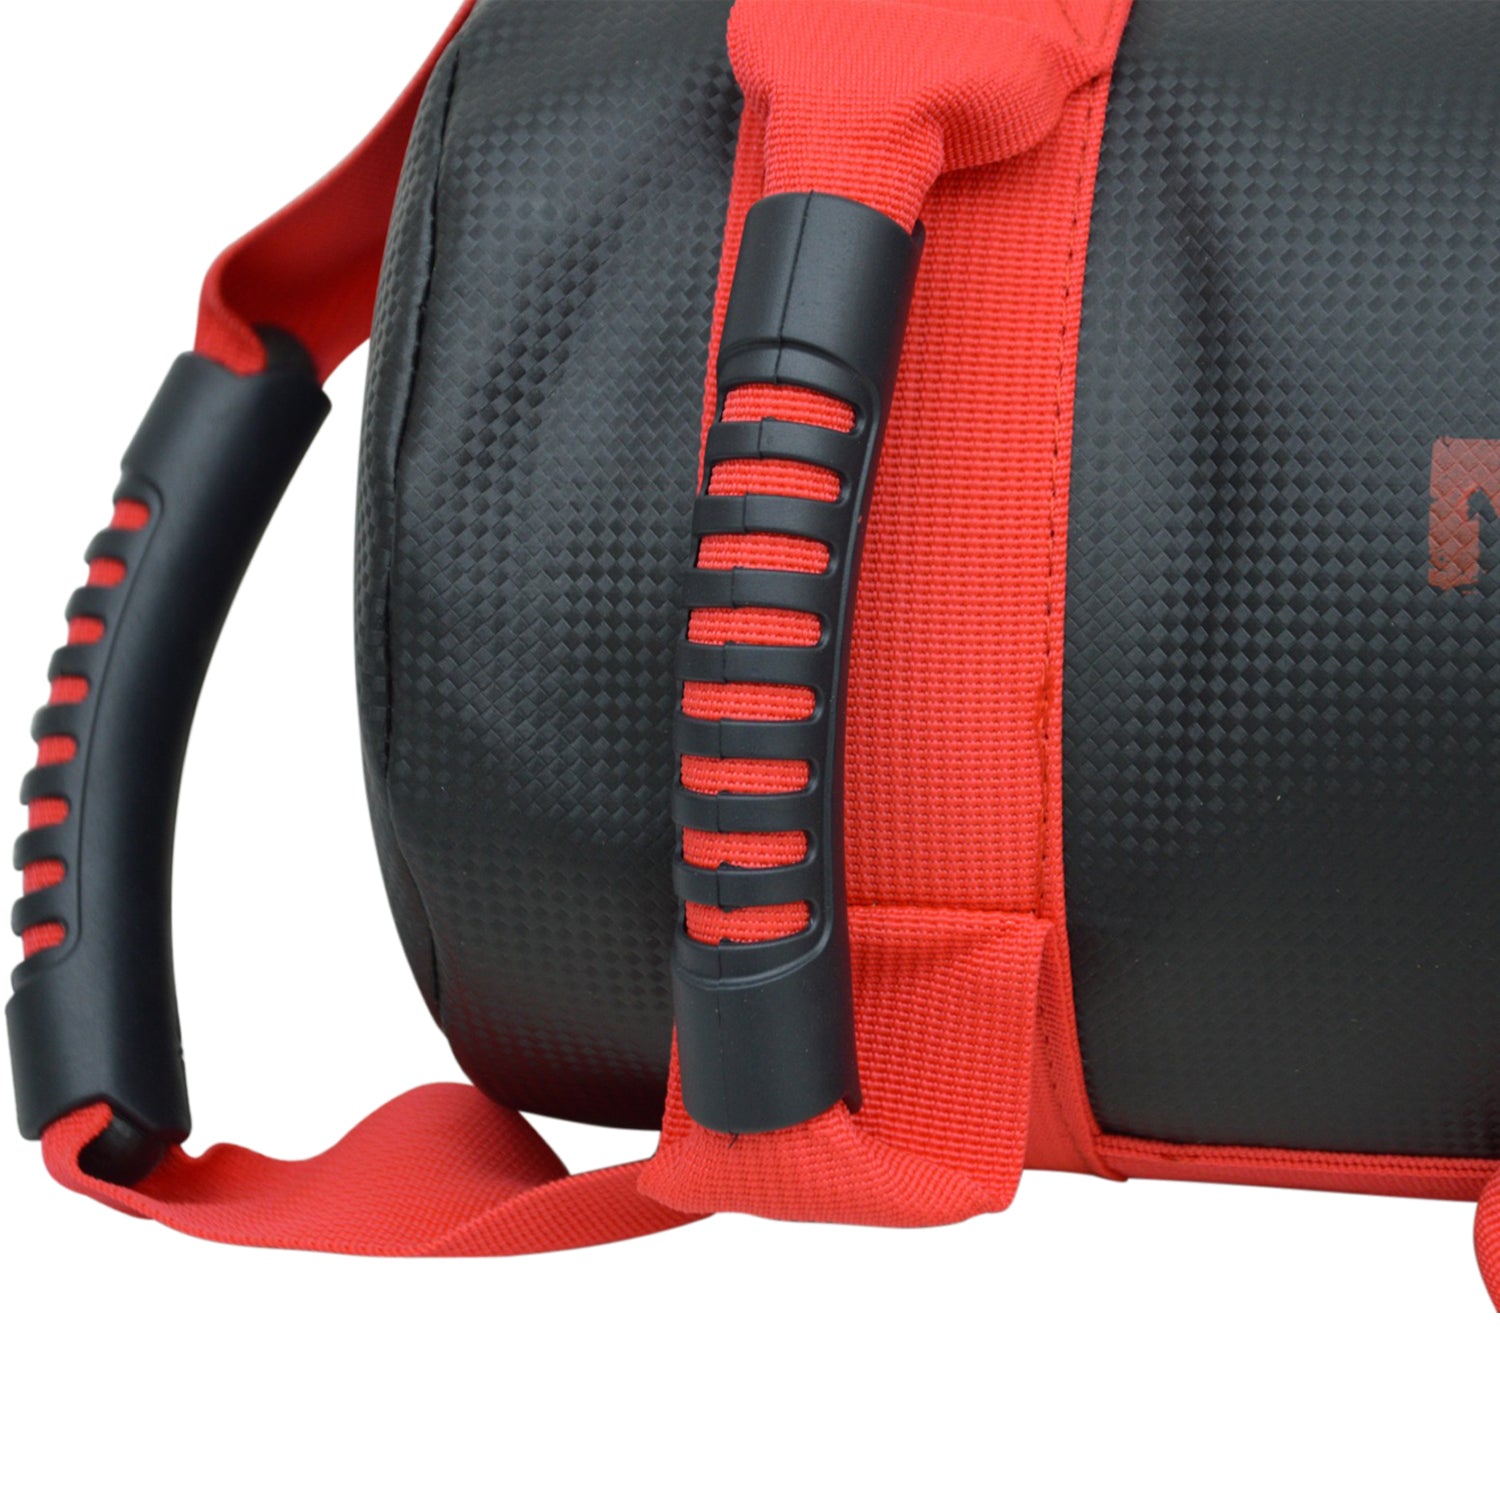 Weighted Training Bag